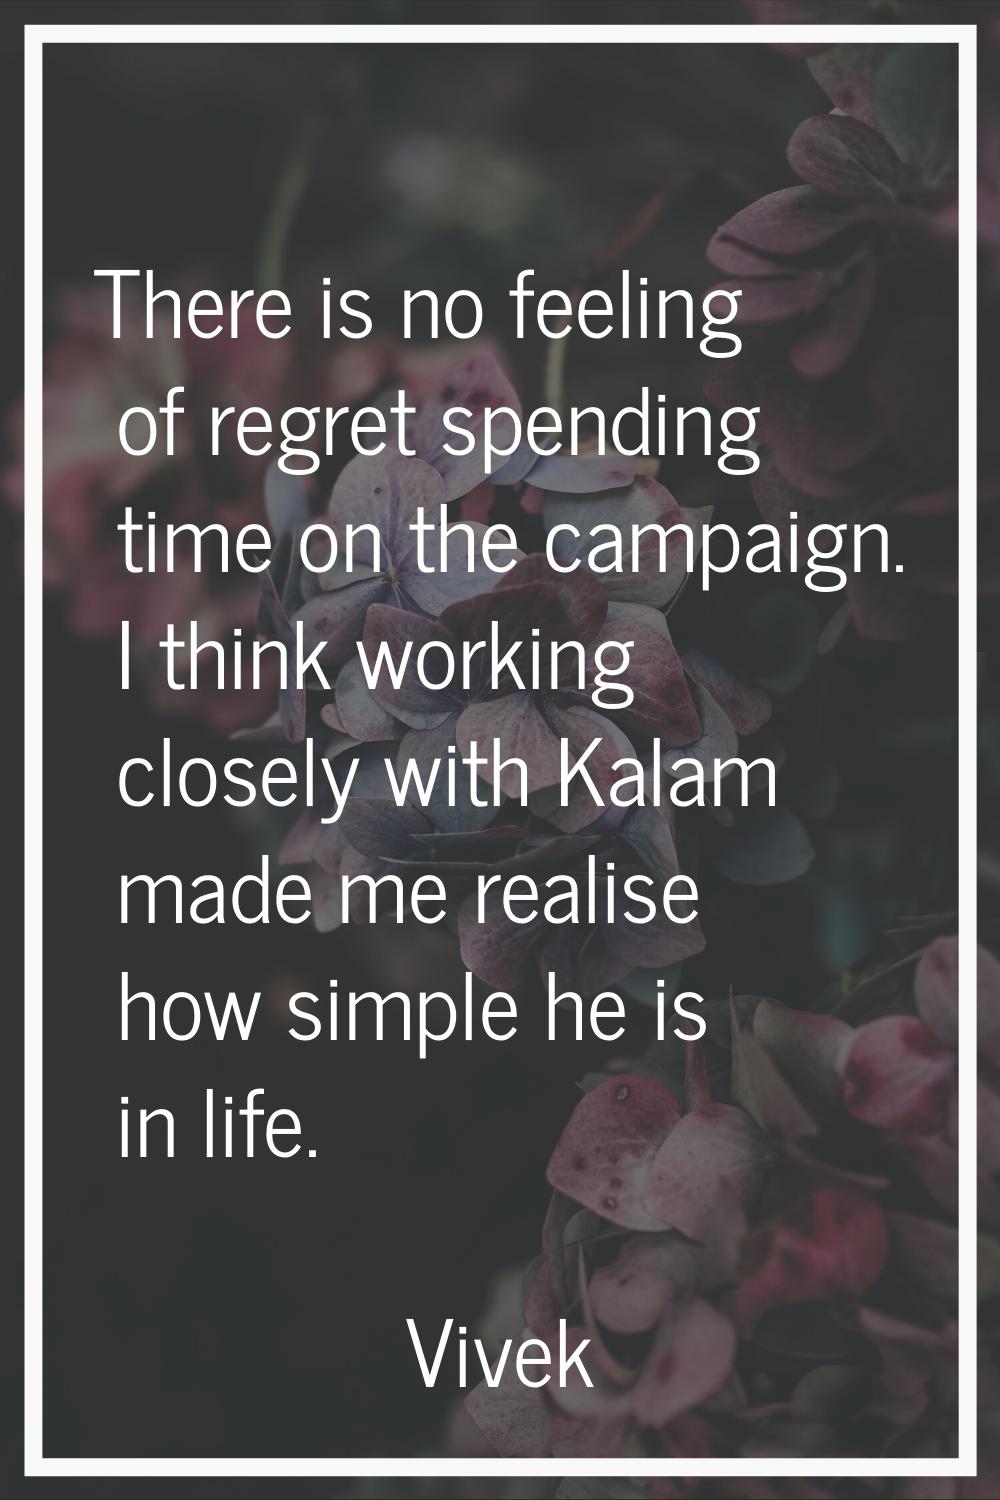 There is no feeling of regret spending time on the campaign. I think working closely with Kalam mad